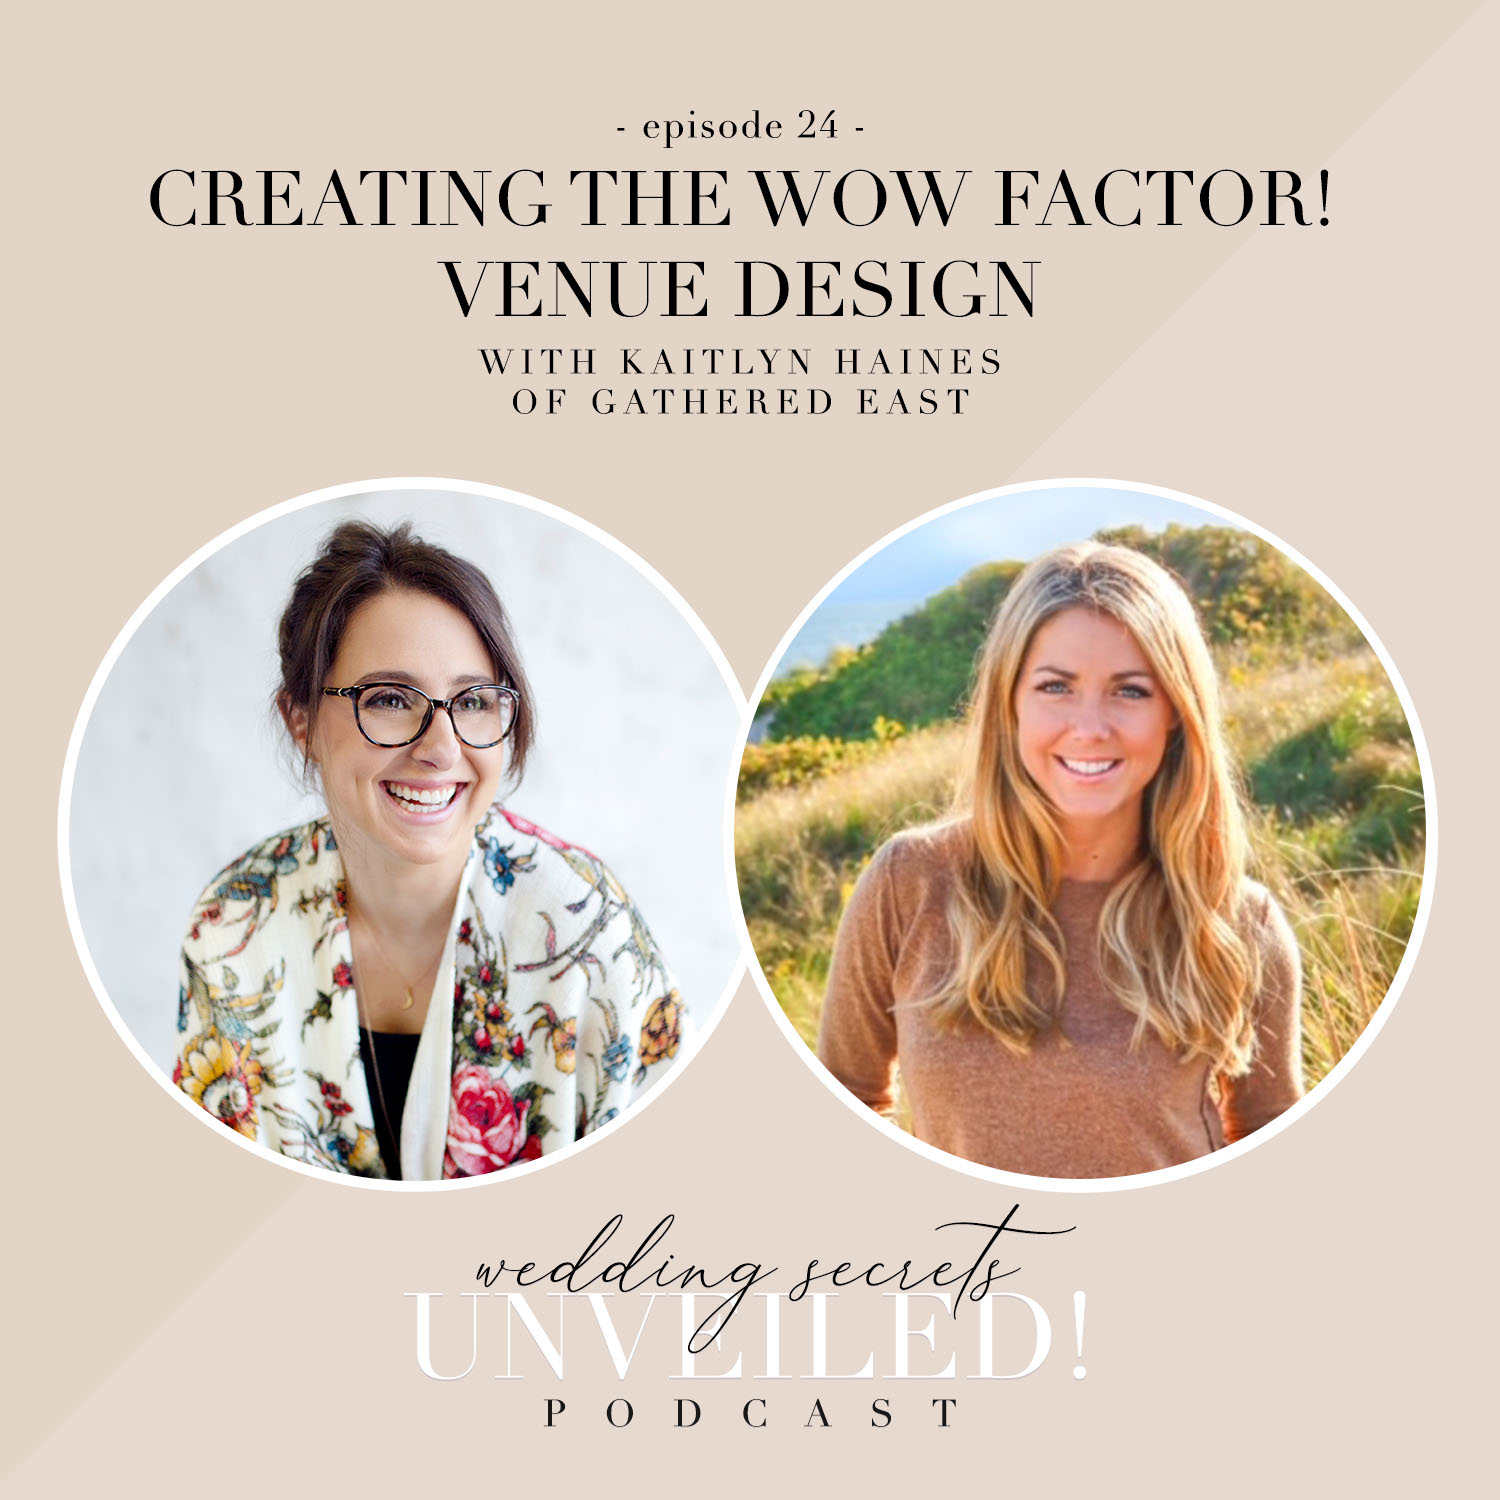 Creating the Wow Factor with your Venue Design tips from Kaitlyn Haines of Gathered East on the Wedding Secrets Unveiled! Podcast